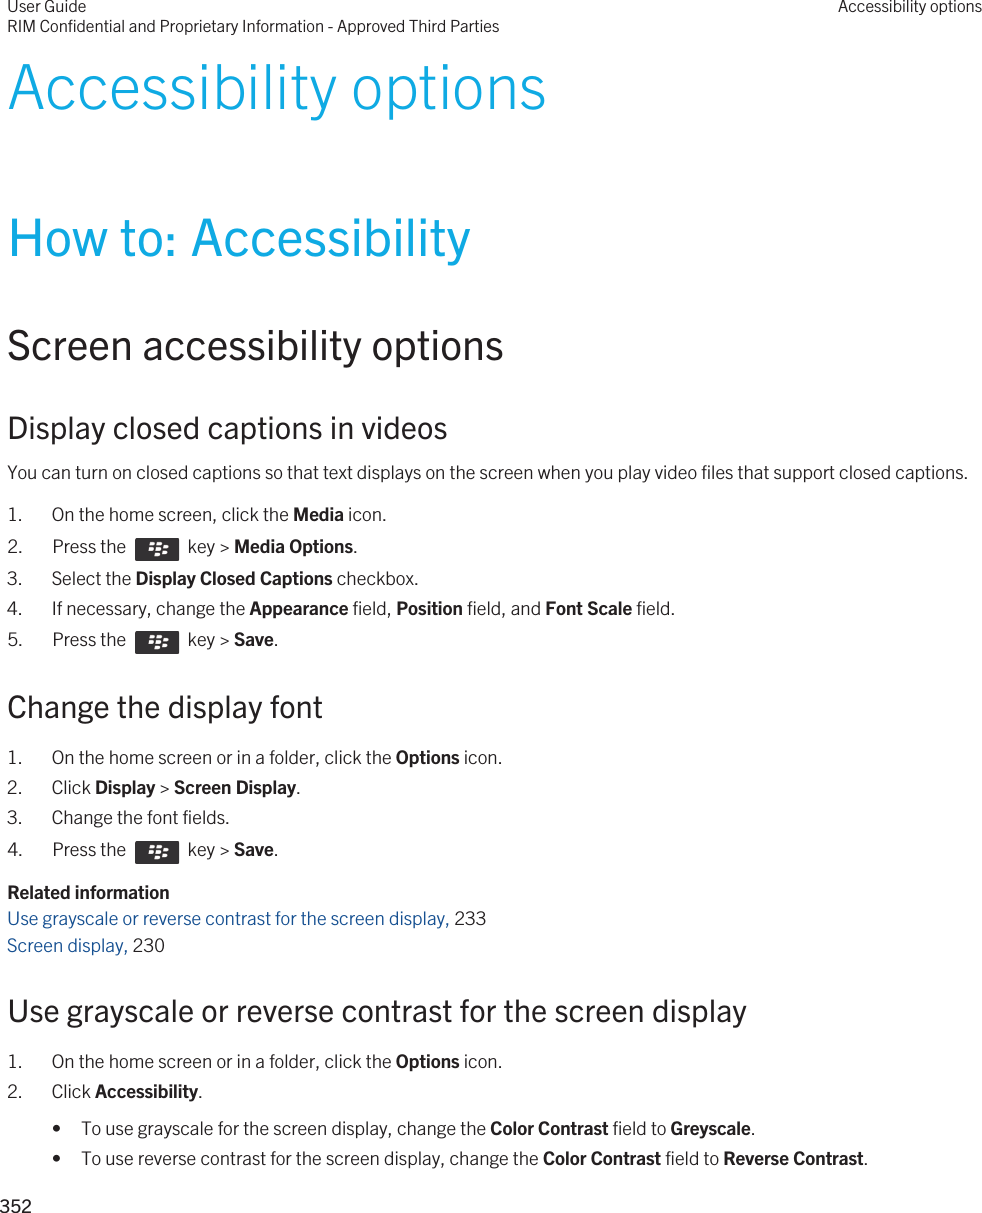 Accessibility optionsHow to: AccessibilityScreen accessibility optionsDisplay closed captions in videosYou can turn on closed captions so that text displays on the screen when you play video files that support closed captions.1. On the home screen, click the Media icon.2.  Press the    key &gt; Media Options. 3. Select the Display Closed Captions checkbox.4. If necessary, change the Appearance field, Position field, and Font Scale field.5.  Press the    key &gt; Save. Change the display font1. On the home screen or in a folder, click the Options icon.2. Click Display &gt; Screen Display.3. Change the font fields.4.  Press the    key &gt; Save. Related informationUse grayscale or reverse contrast for the screen display, 233 Screen display, 230 Use grayscale or reverse contrast for the screen display1. On the home screen or in a folder, click the Options icon.2. Click Accessibility.• To use grayscale for the screen display, change the Color Contrast field to Greyscale.• To use reverse contrast for the screen display, change the Color Contrast field to Reverse Contrast.User GuideRIM Confidential and Proprietary Information - Approved Third PartiesAccessibility options352 